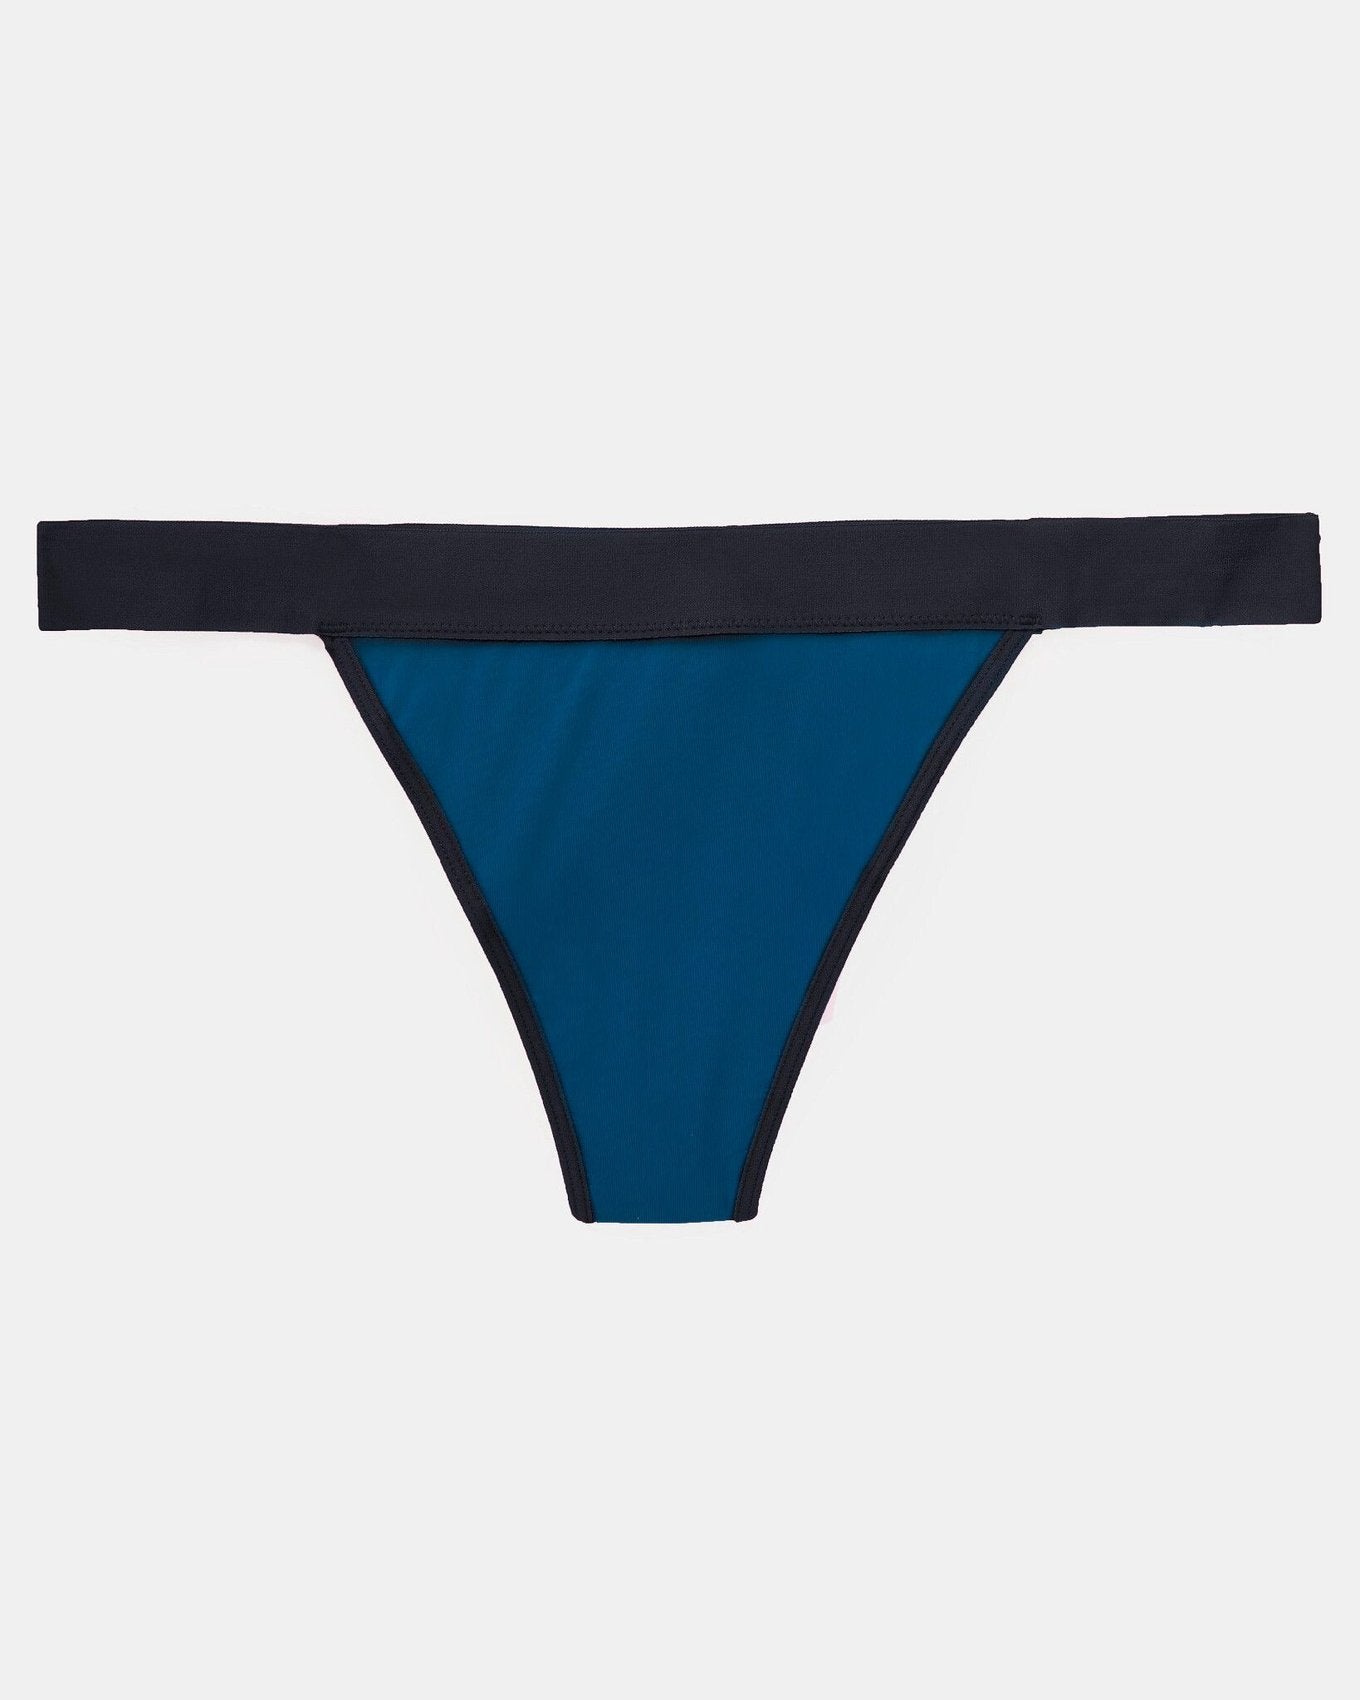 Joyja Leah period-proof panty in color Classic Blue and shape thong